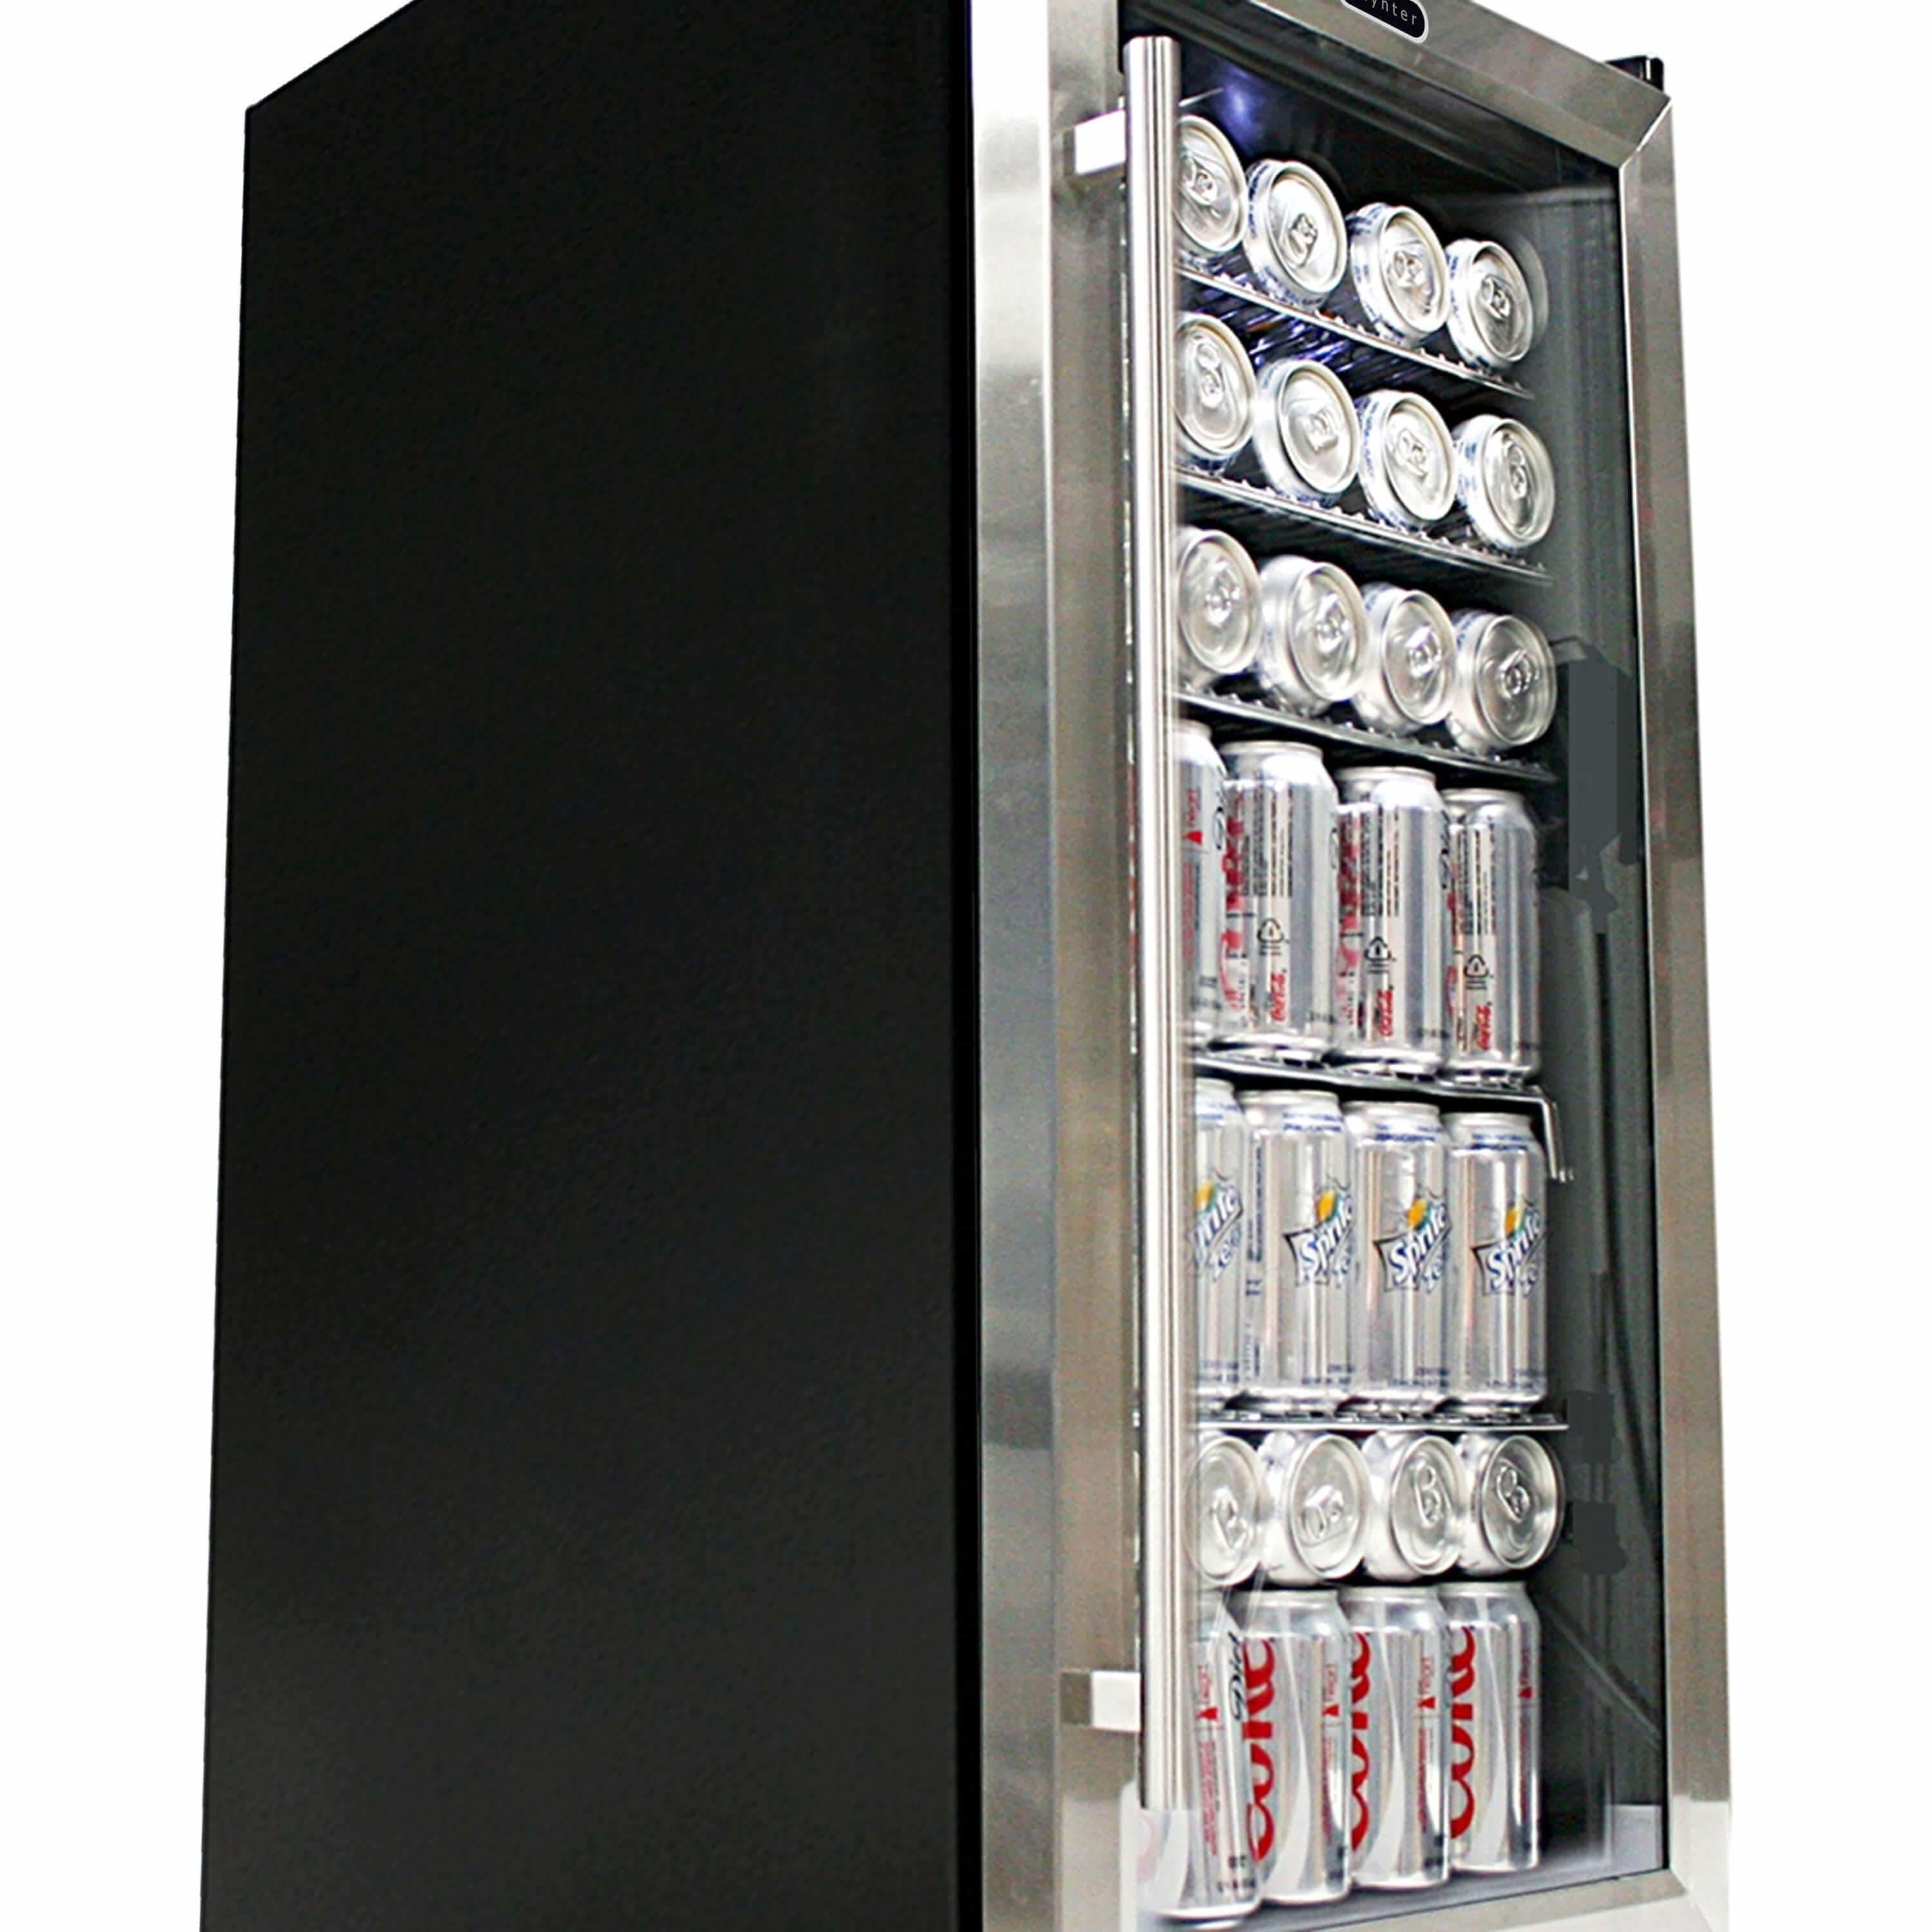 Whynter 85W Beverage Cooler, 120-Can, 115V, Stainless Steel